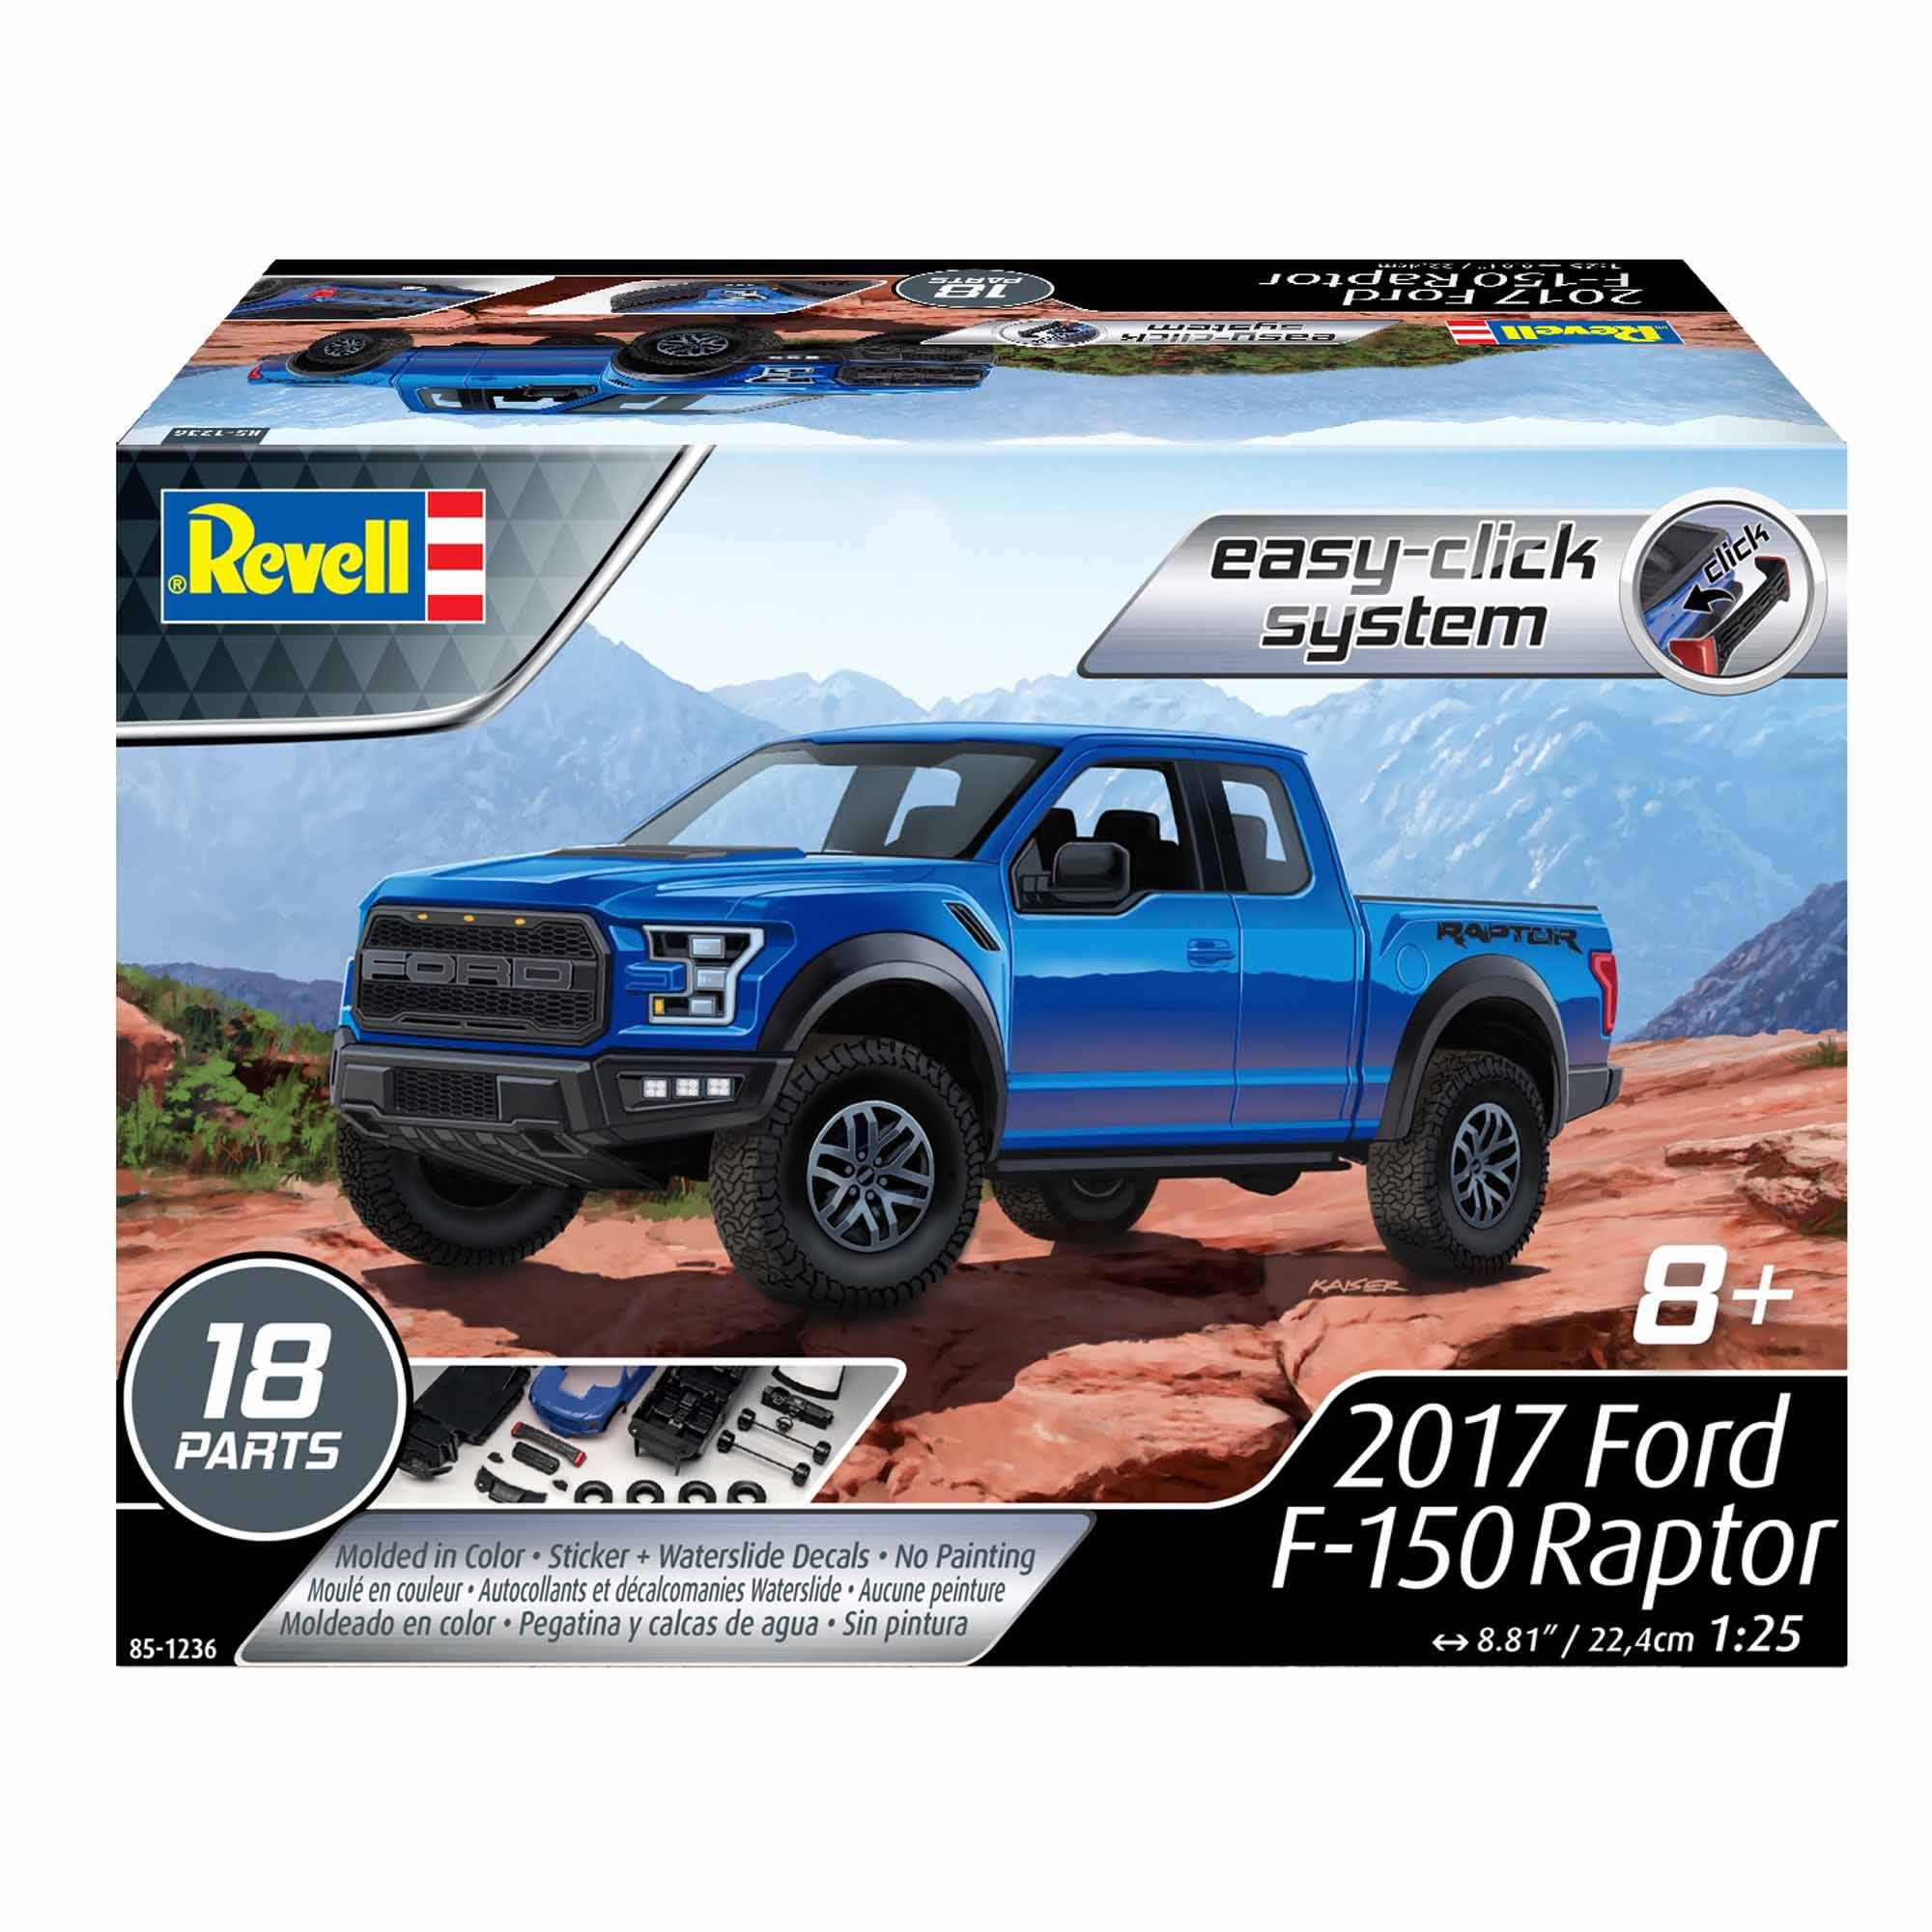 Revell 2017 Ford F-150 Raptor Easy Click 1/25 Scale 85-1236